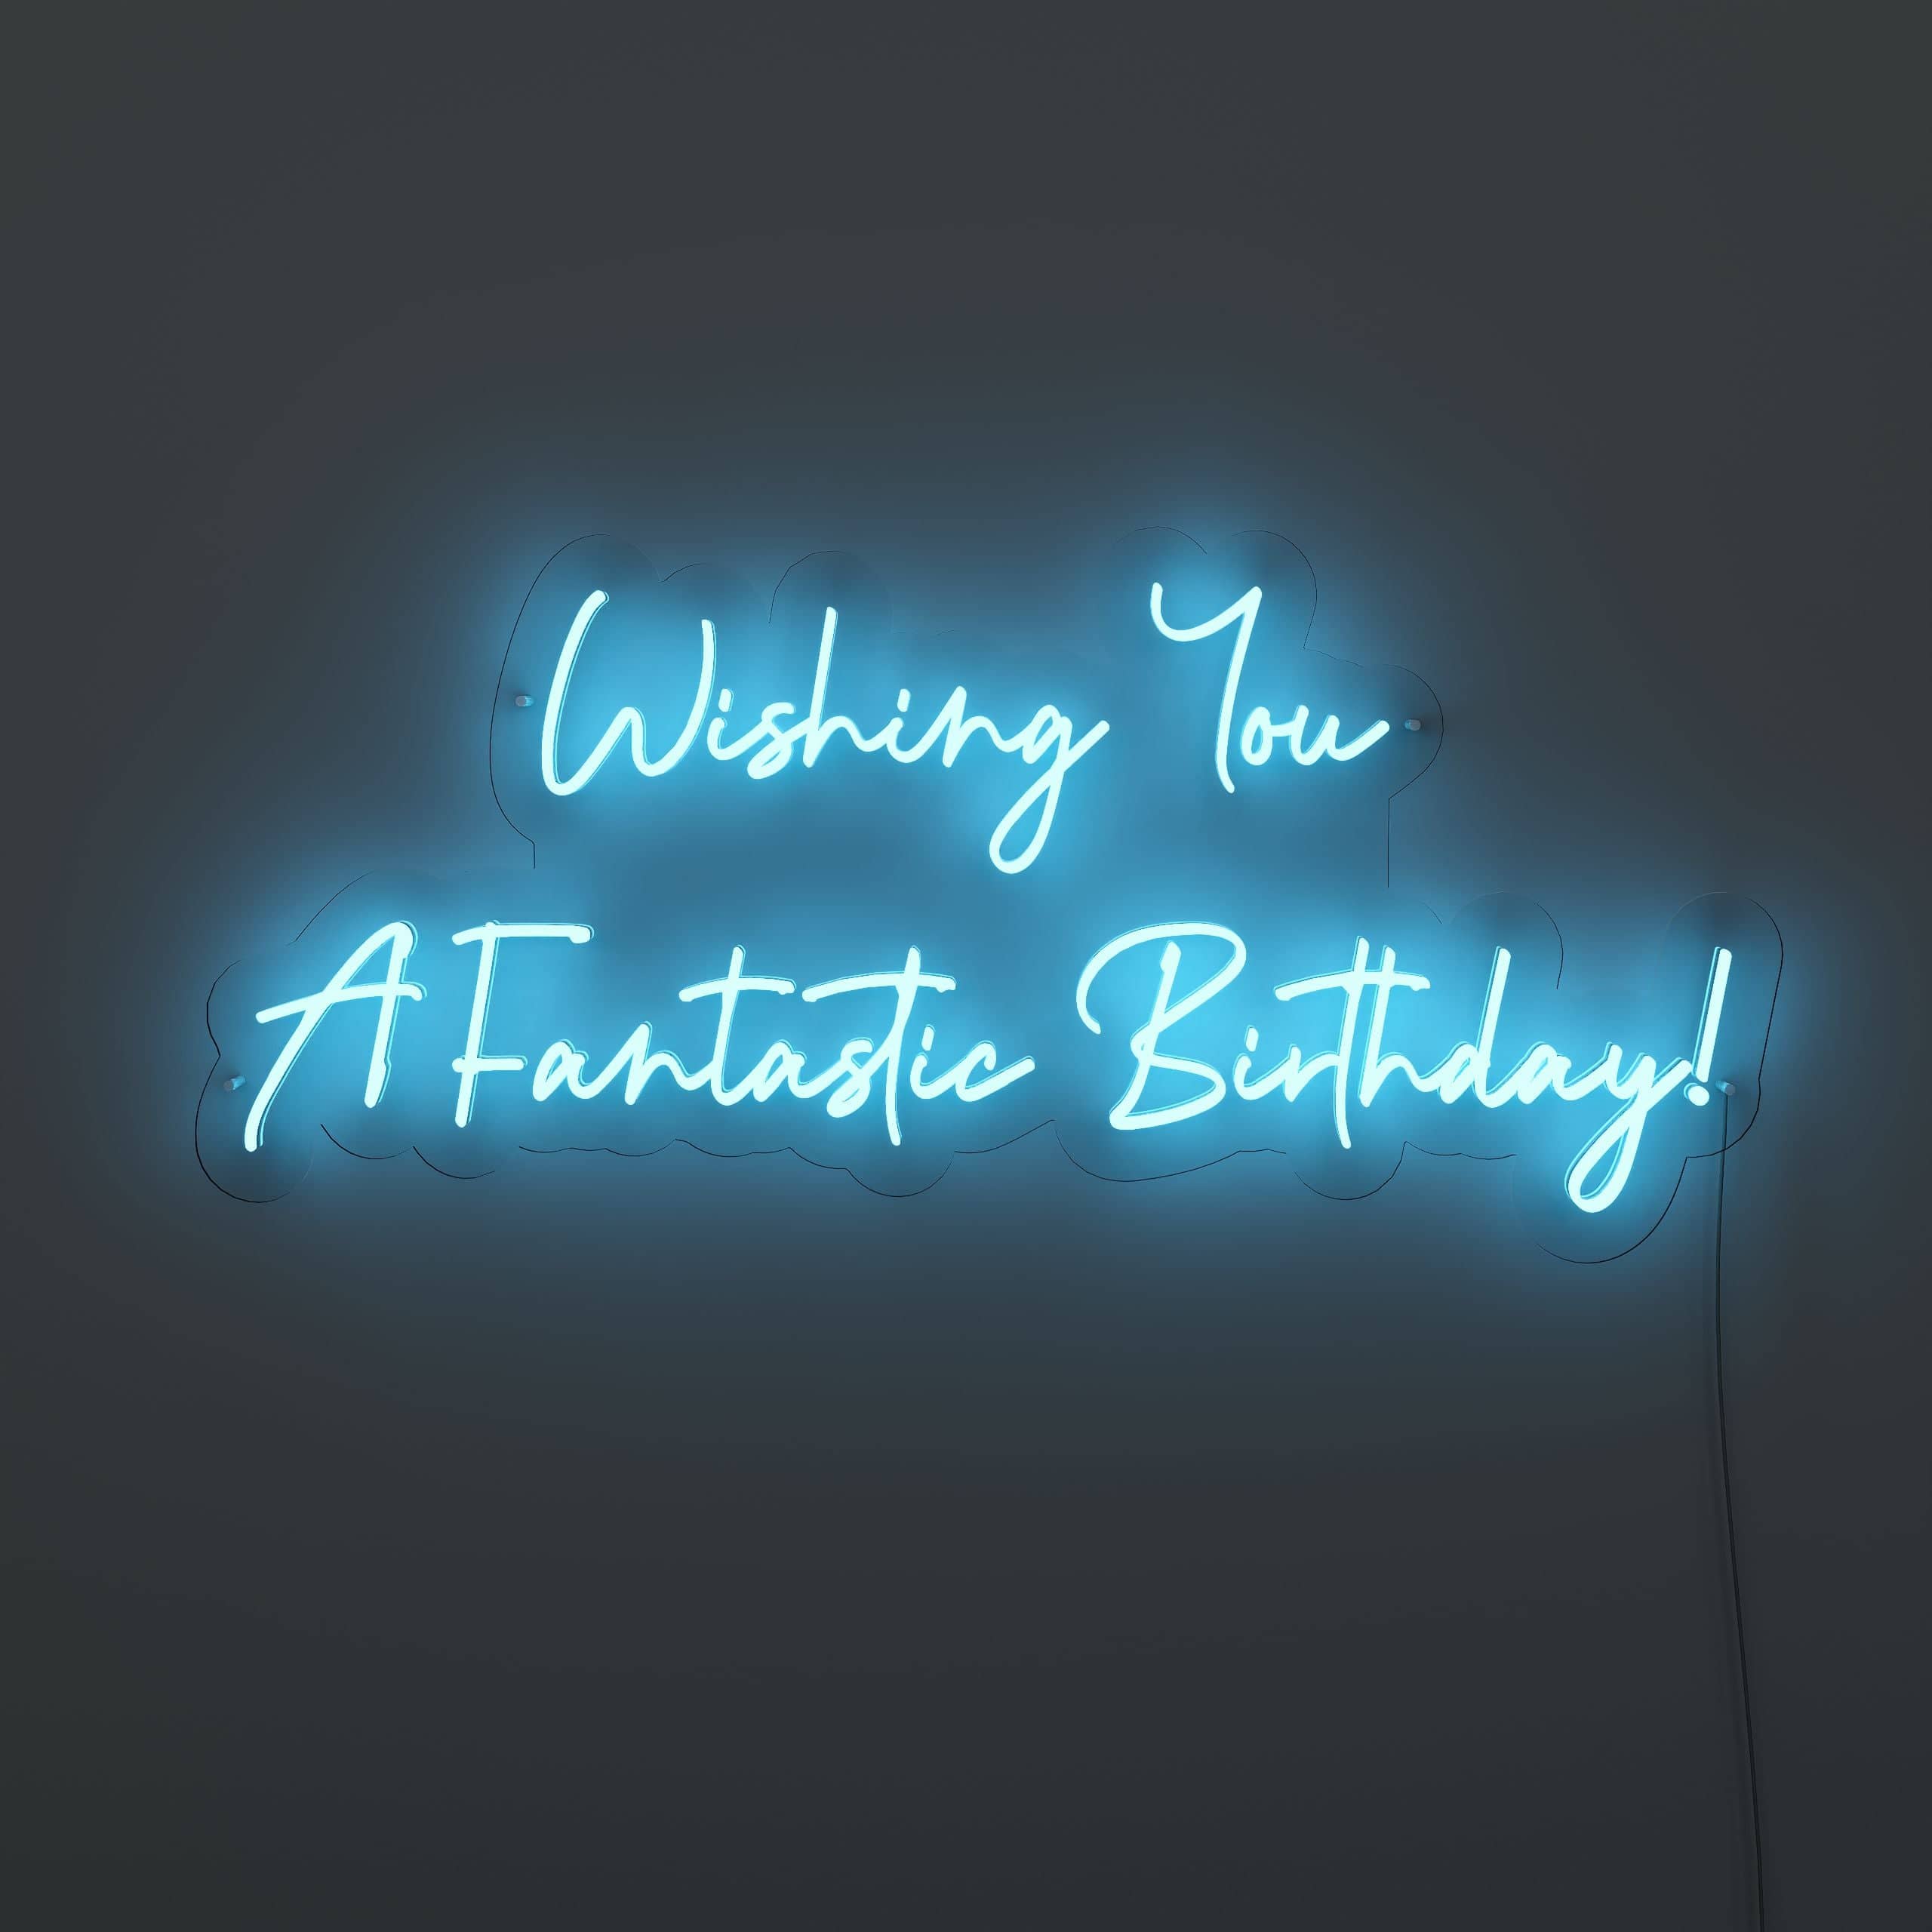 enjoy-every-moment-of-your-fantastic-birthday!-neon-sign-lite